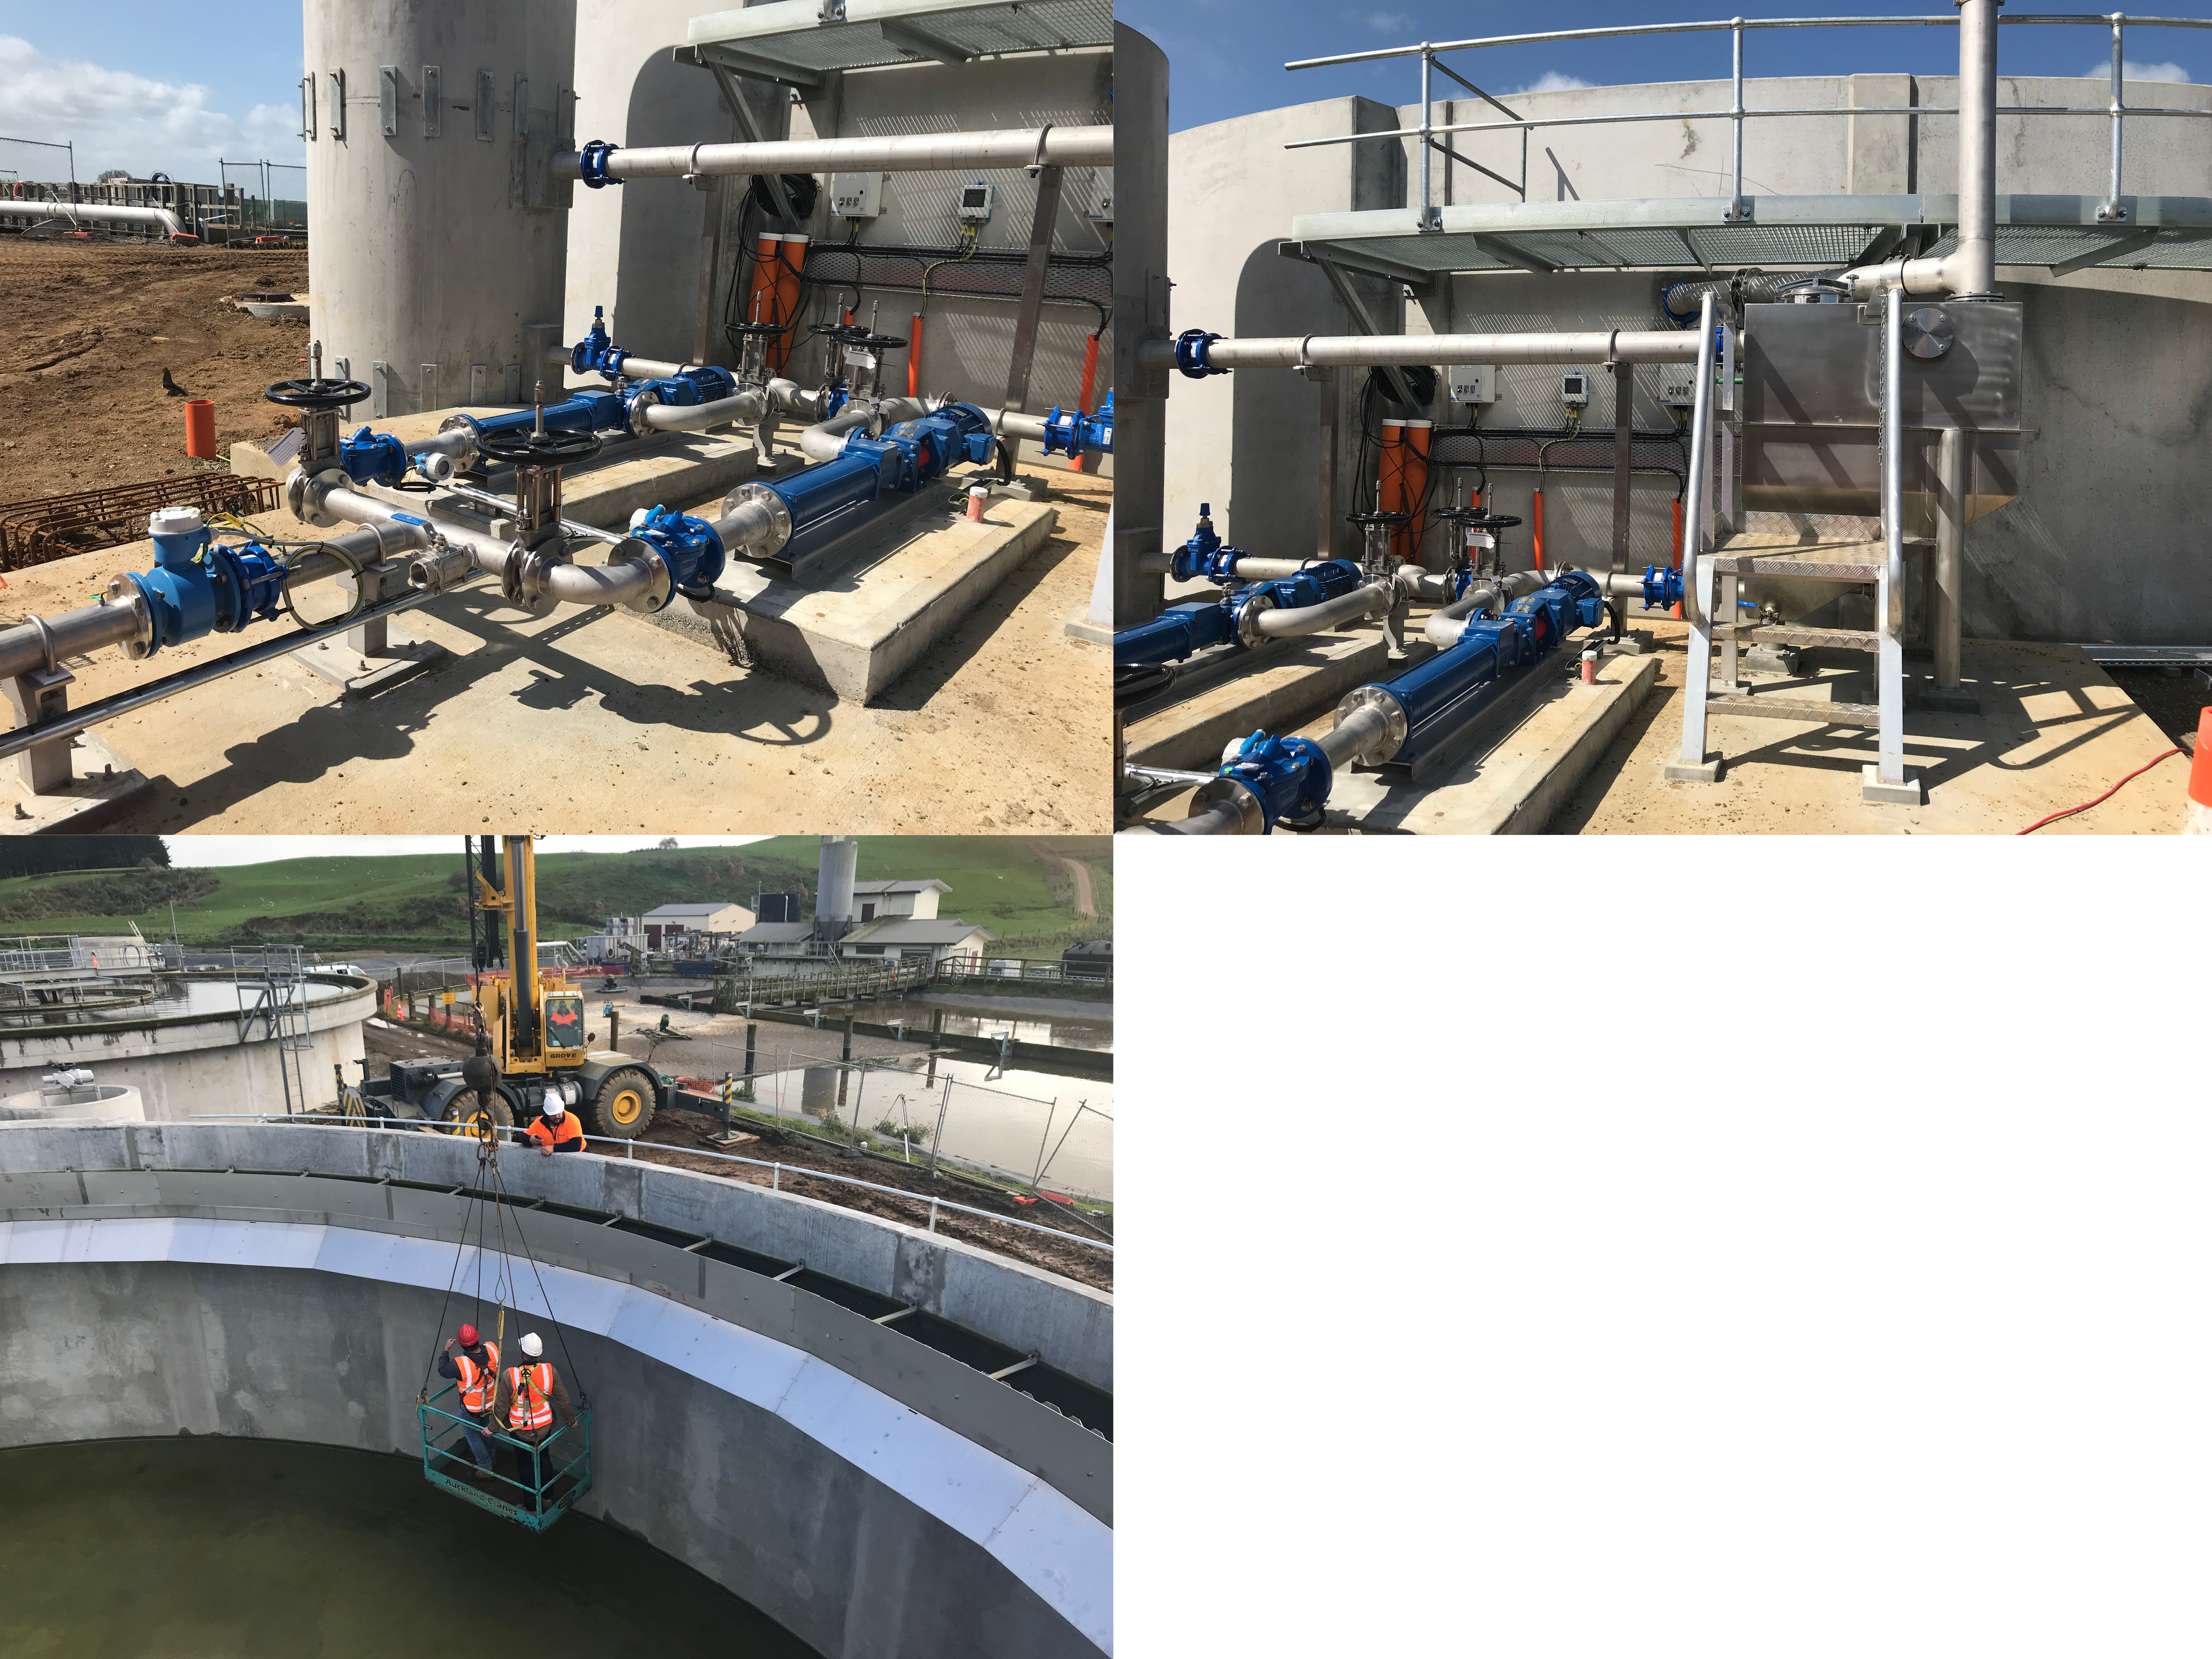 Top photos: New inlet area with pipes. Bottom photo: New Clarifier under inspection by Beca consultants (designer) and Spartan Construction (contractor).